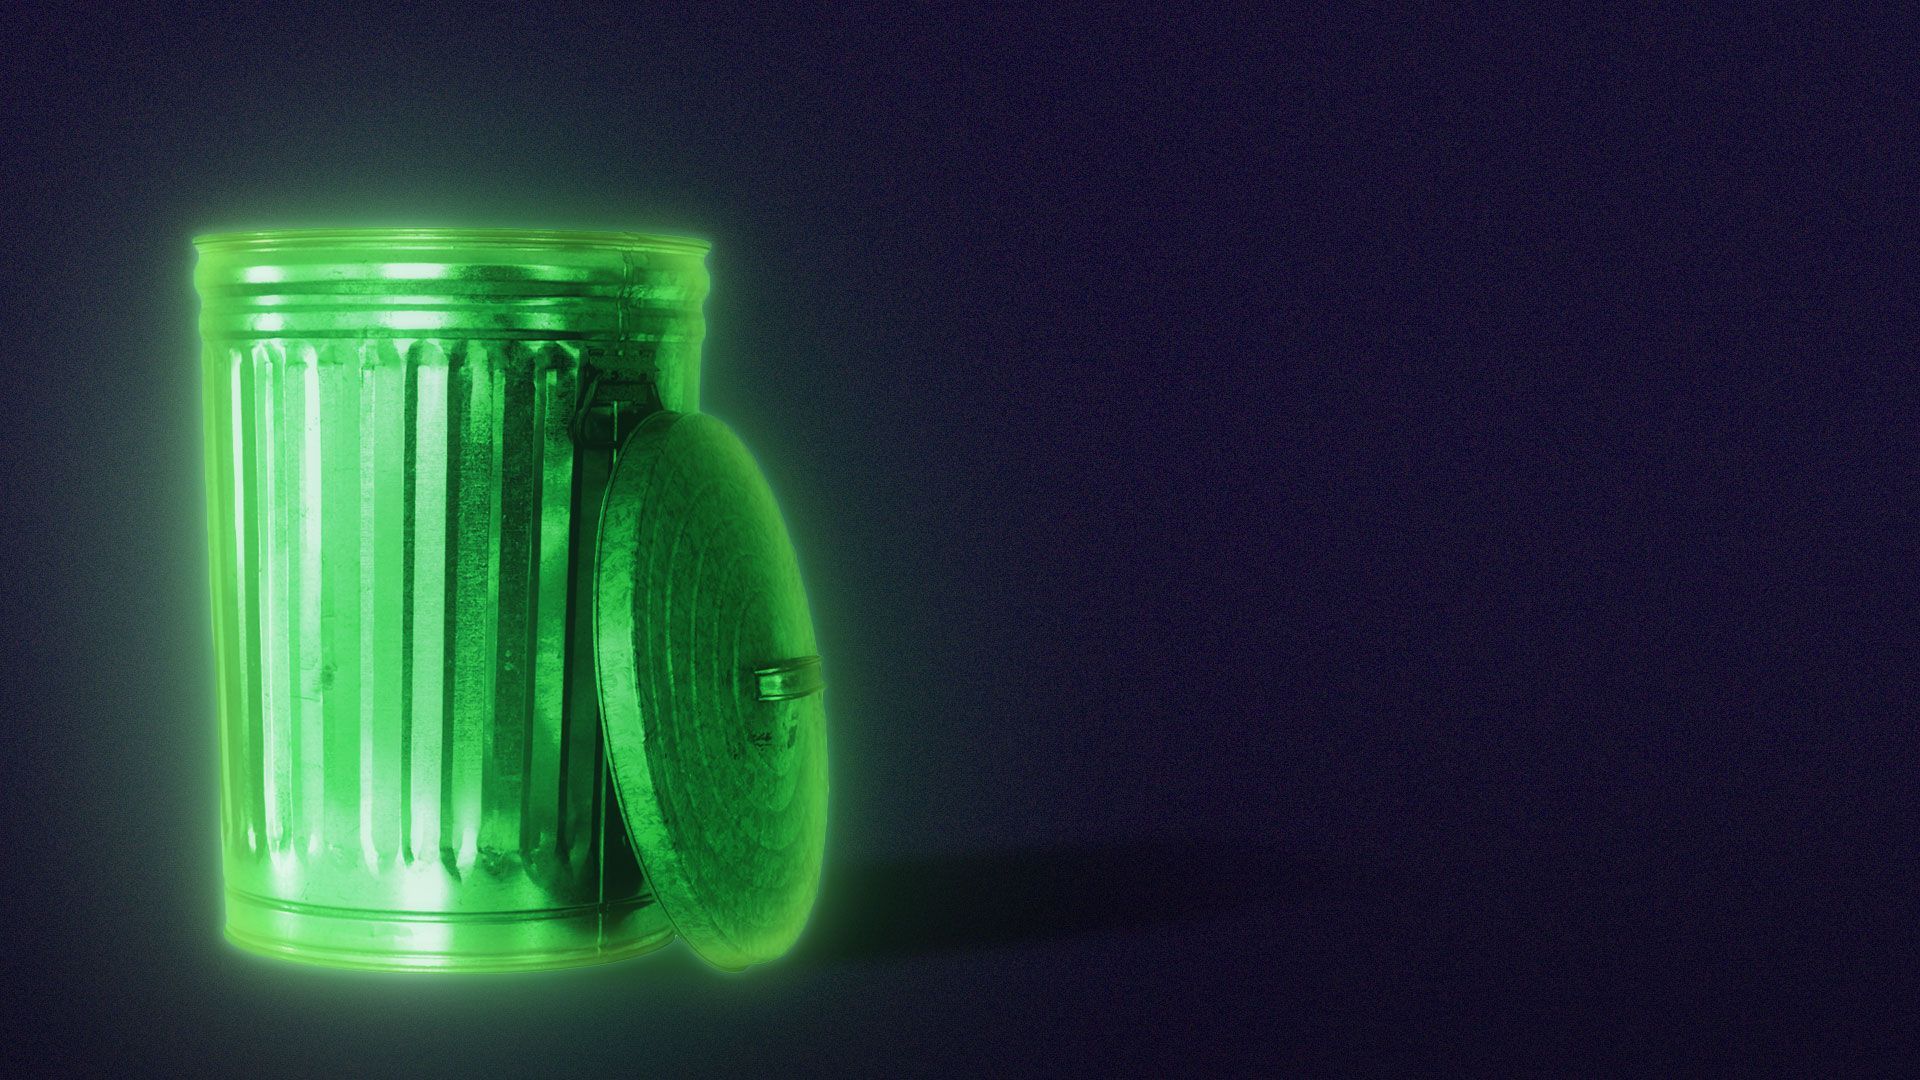 Illustration of a glowing green radioactive trash can.